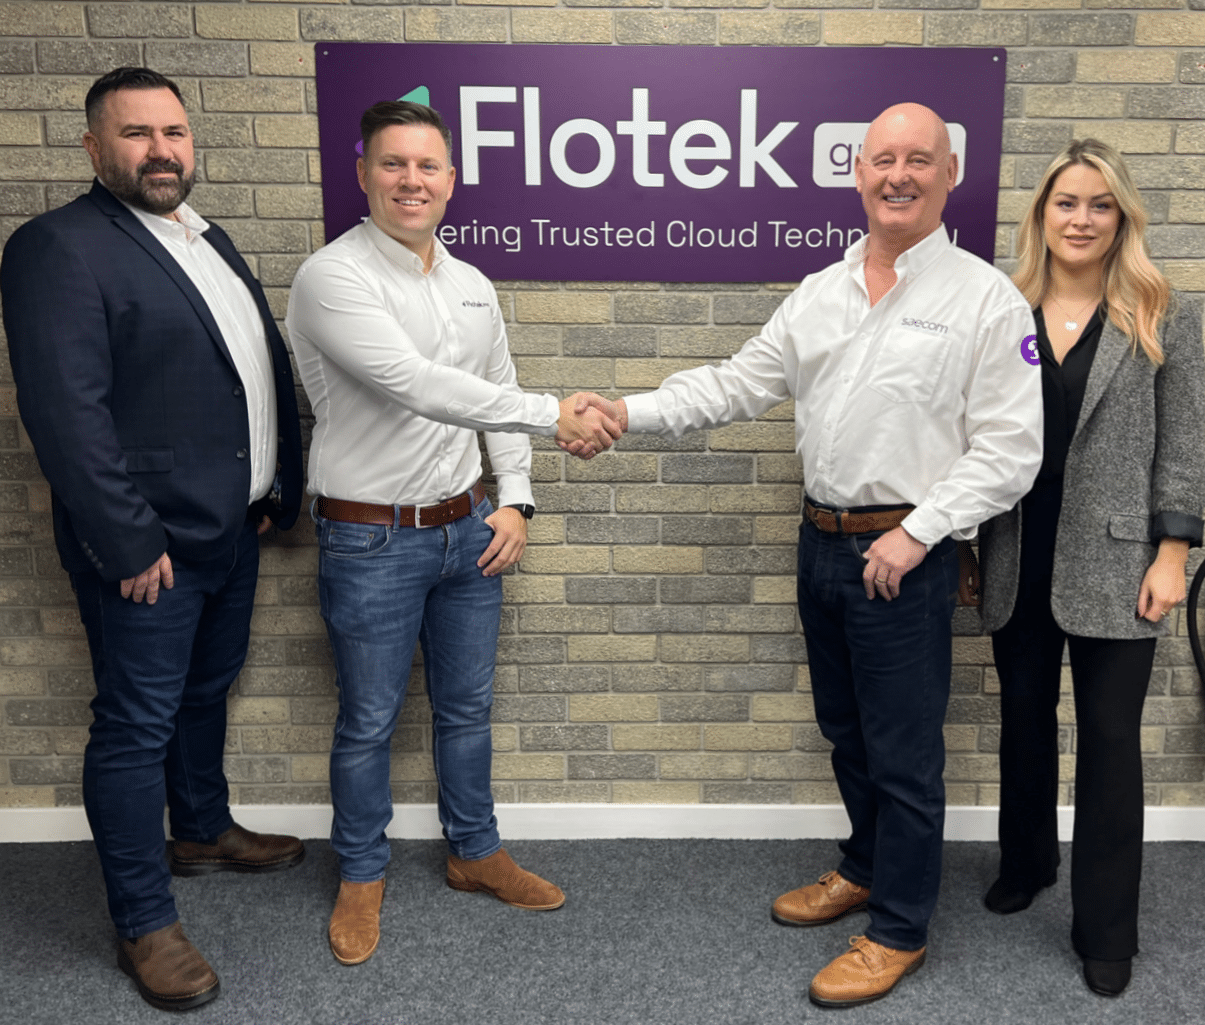 Jay Ball, the Chief Executive Officer of Flotek Group, Phillip Emanuel, Group Telecoms Director, Stephen Davies, Flotek Group Consultant